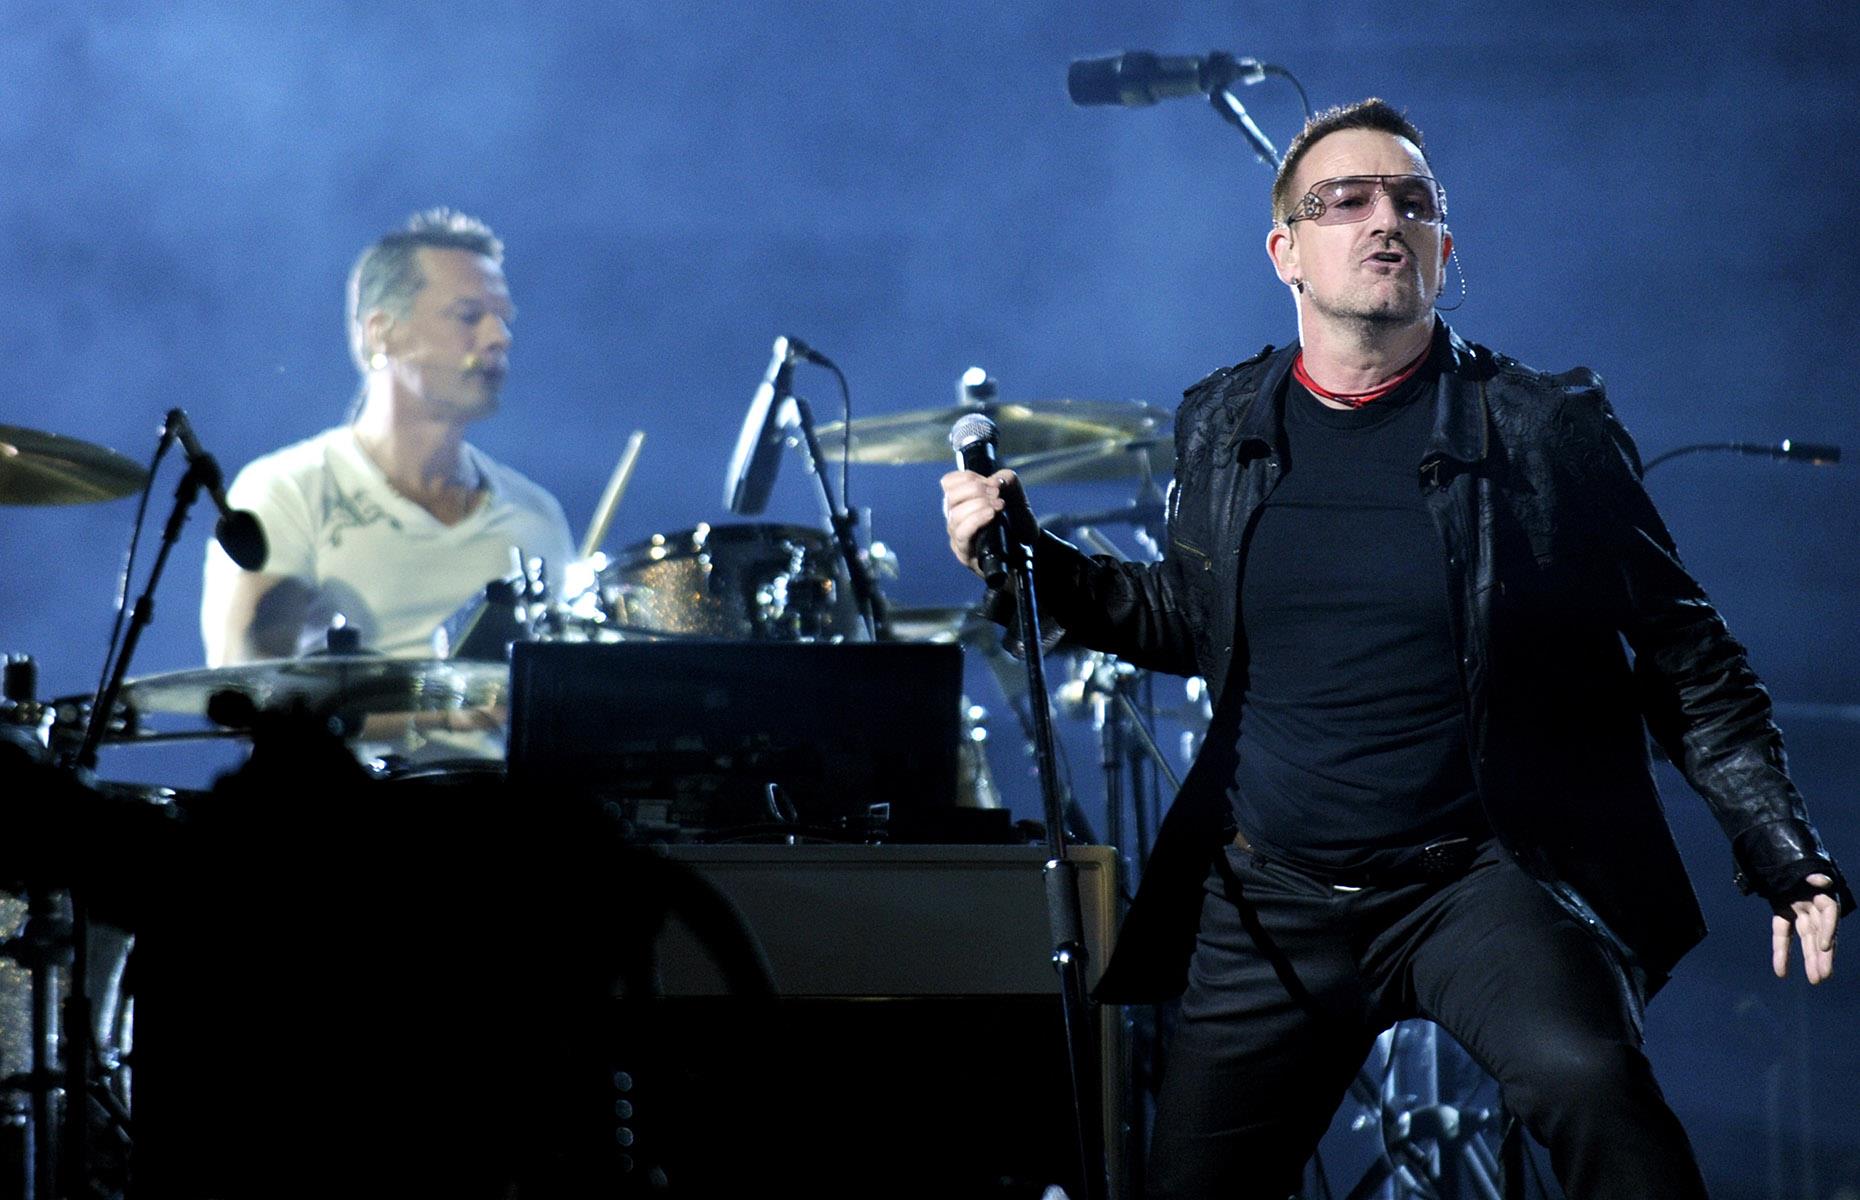 <p>U2's groundbreaking <em>360° Tour</em>, which ran between 2009 and 2011, reigns supreme as the highest-grossing concert tour of all time by a band (with Coldplay primed to claim the title later this year). The legendary Irish band embarked on a gargantuan global adventure that included 110 shows in 30 countries across North America, Europe, Oceania, Africa, and South America.</p>  <p>The tour was attended by a staggering 7.3 million fans and grossed a total of $736 million. In today's money, that's a cool $1 billion.</p>